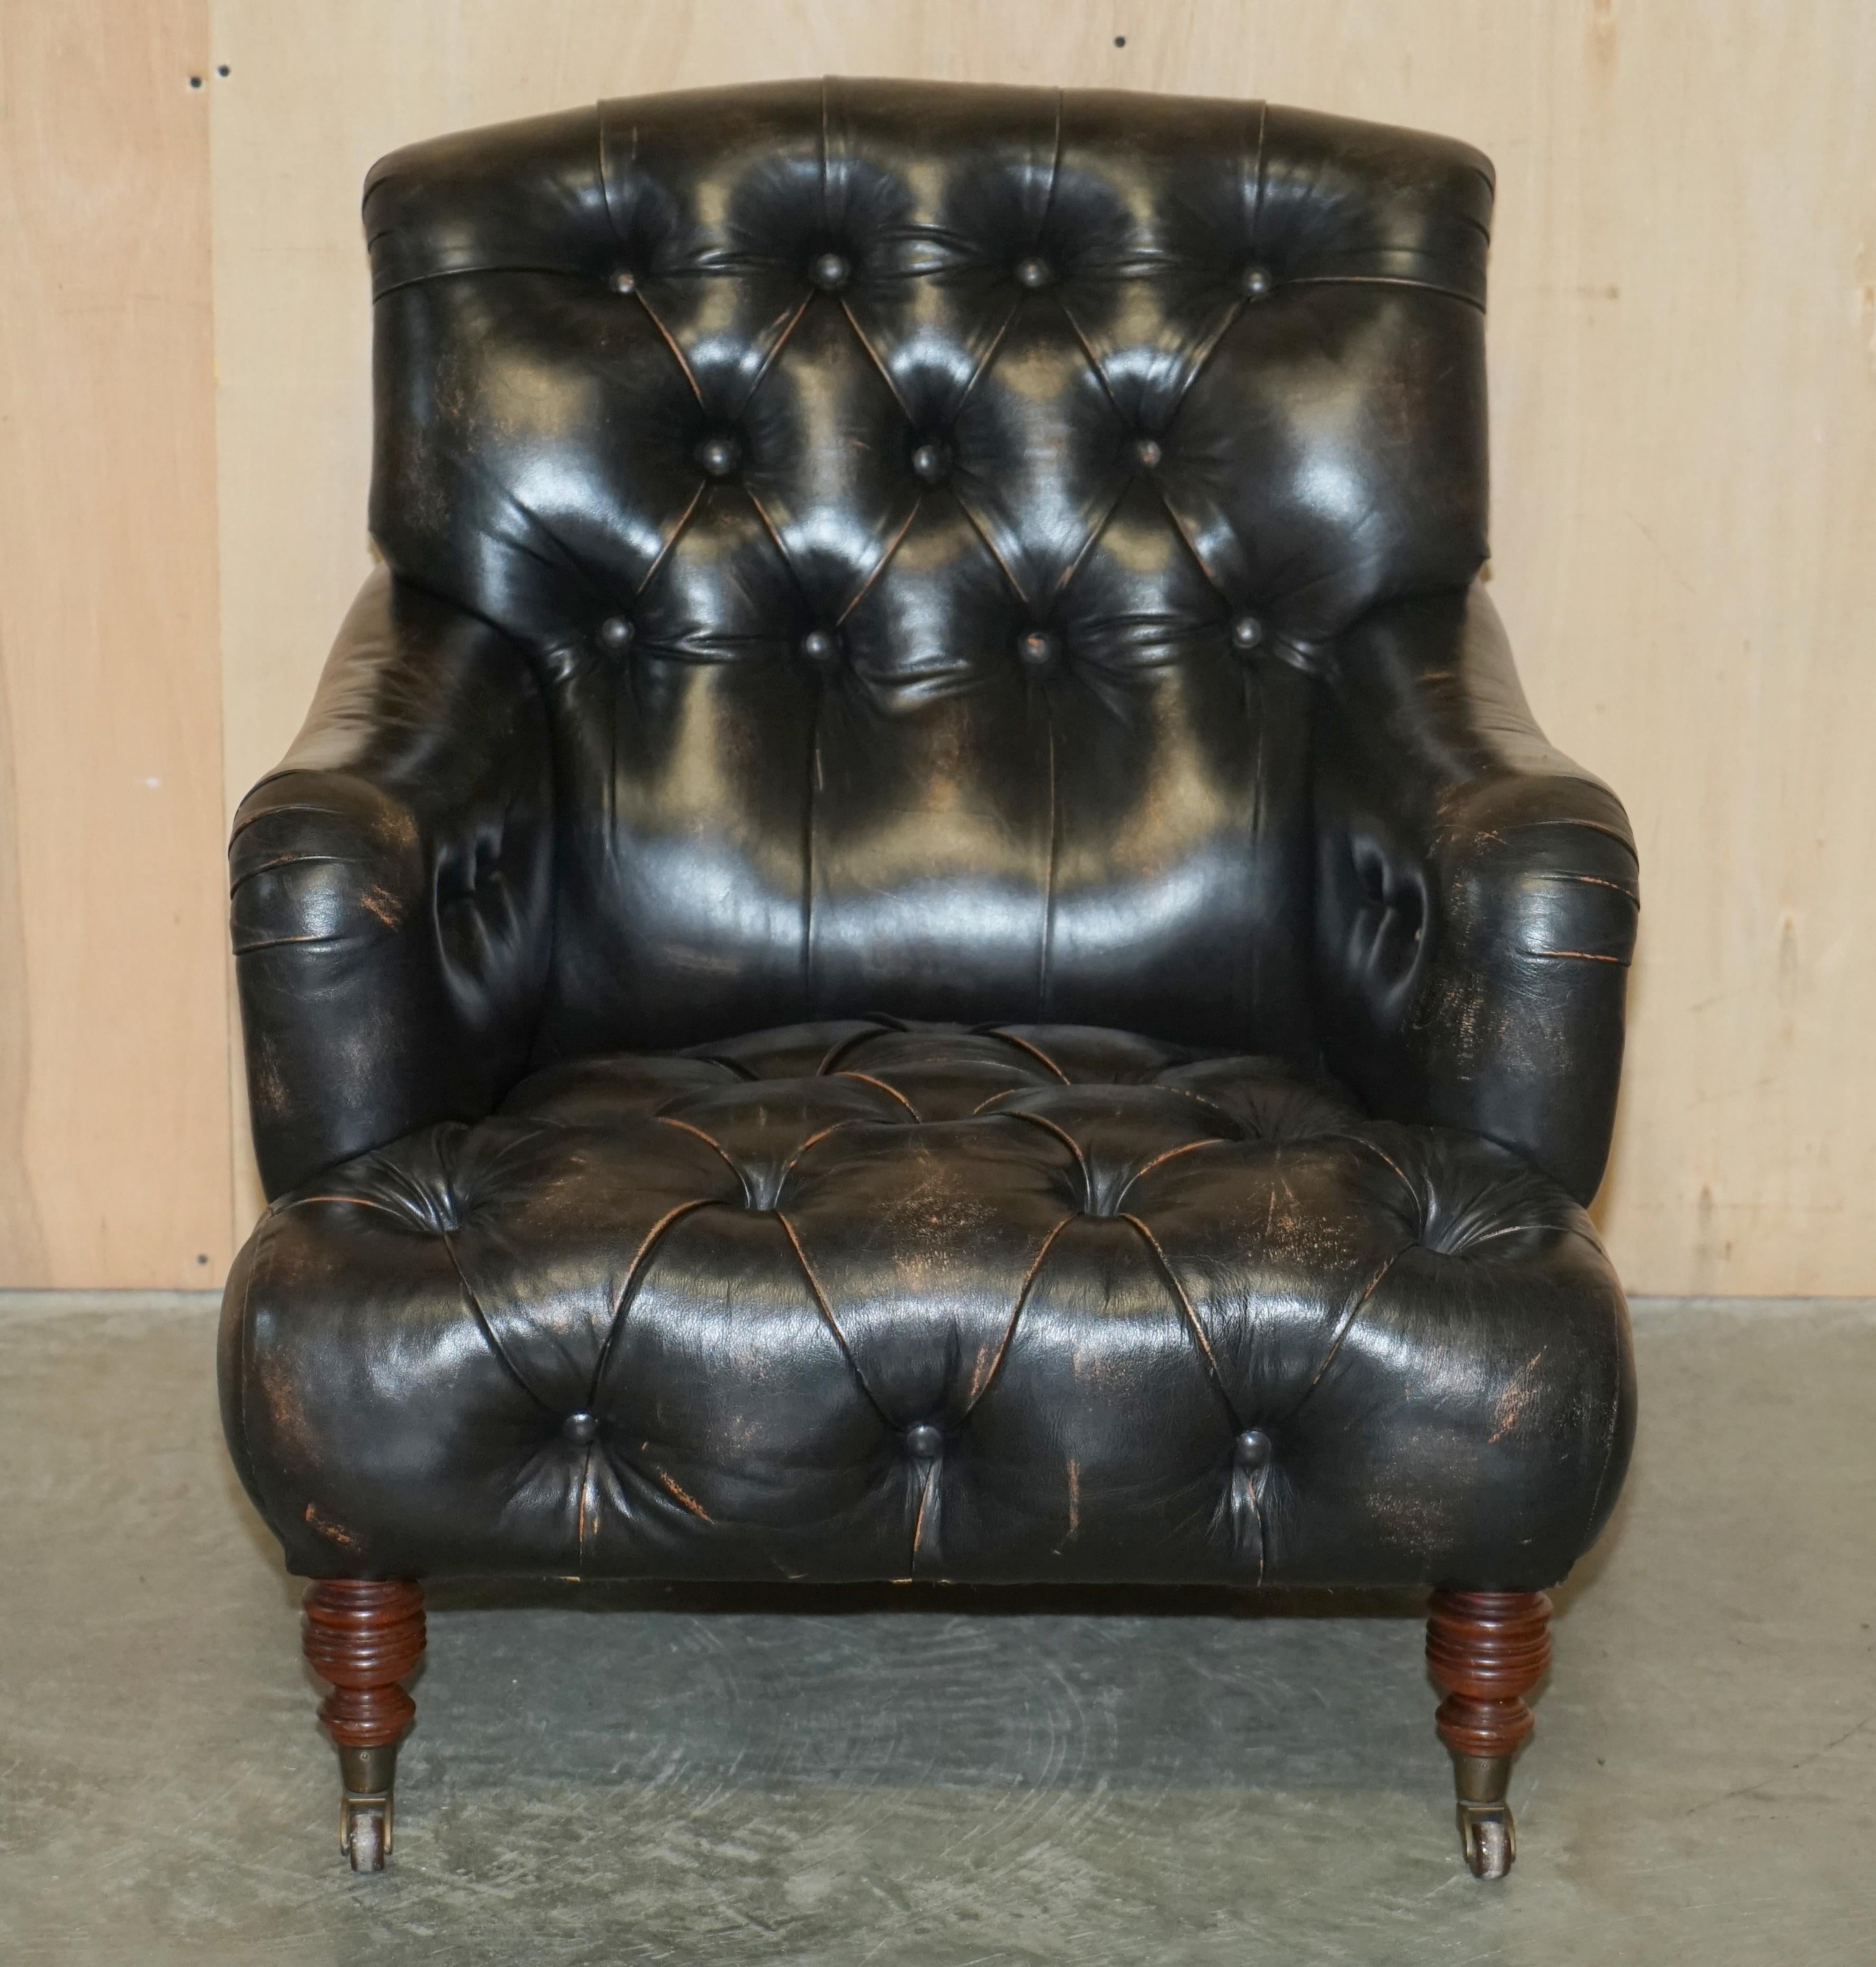 We are delighted to offer for sale this stunning original Victorian Walnut framed Howard & Son’s Bridgewater model style armchair with Chesterfield tufting all over

Please note the delivery fee listed is just a guide, it covers within the M25